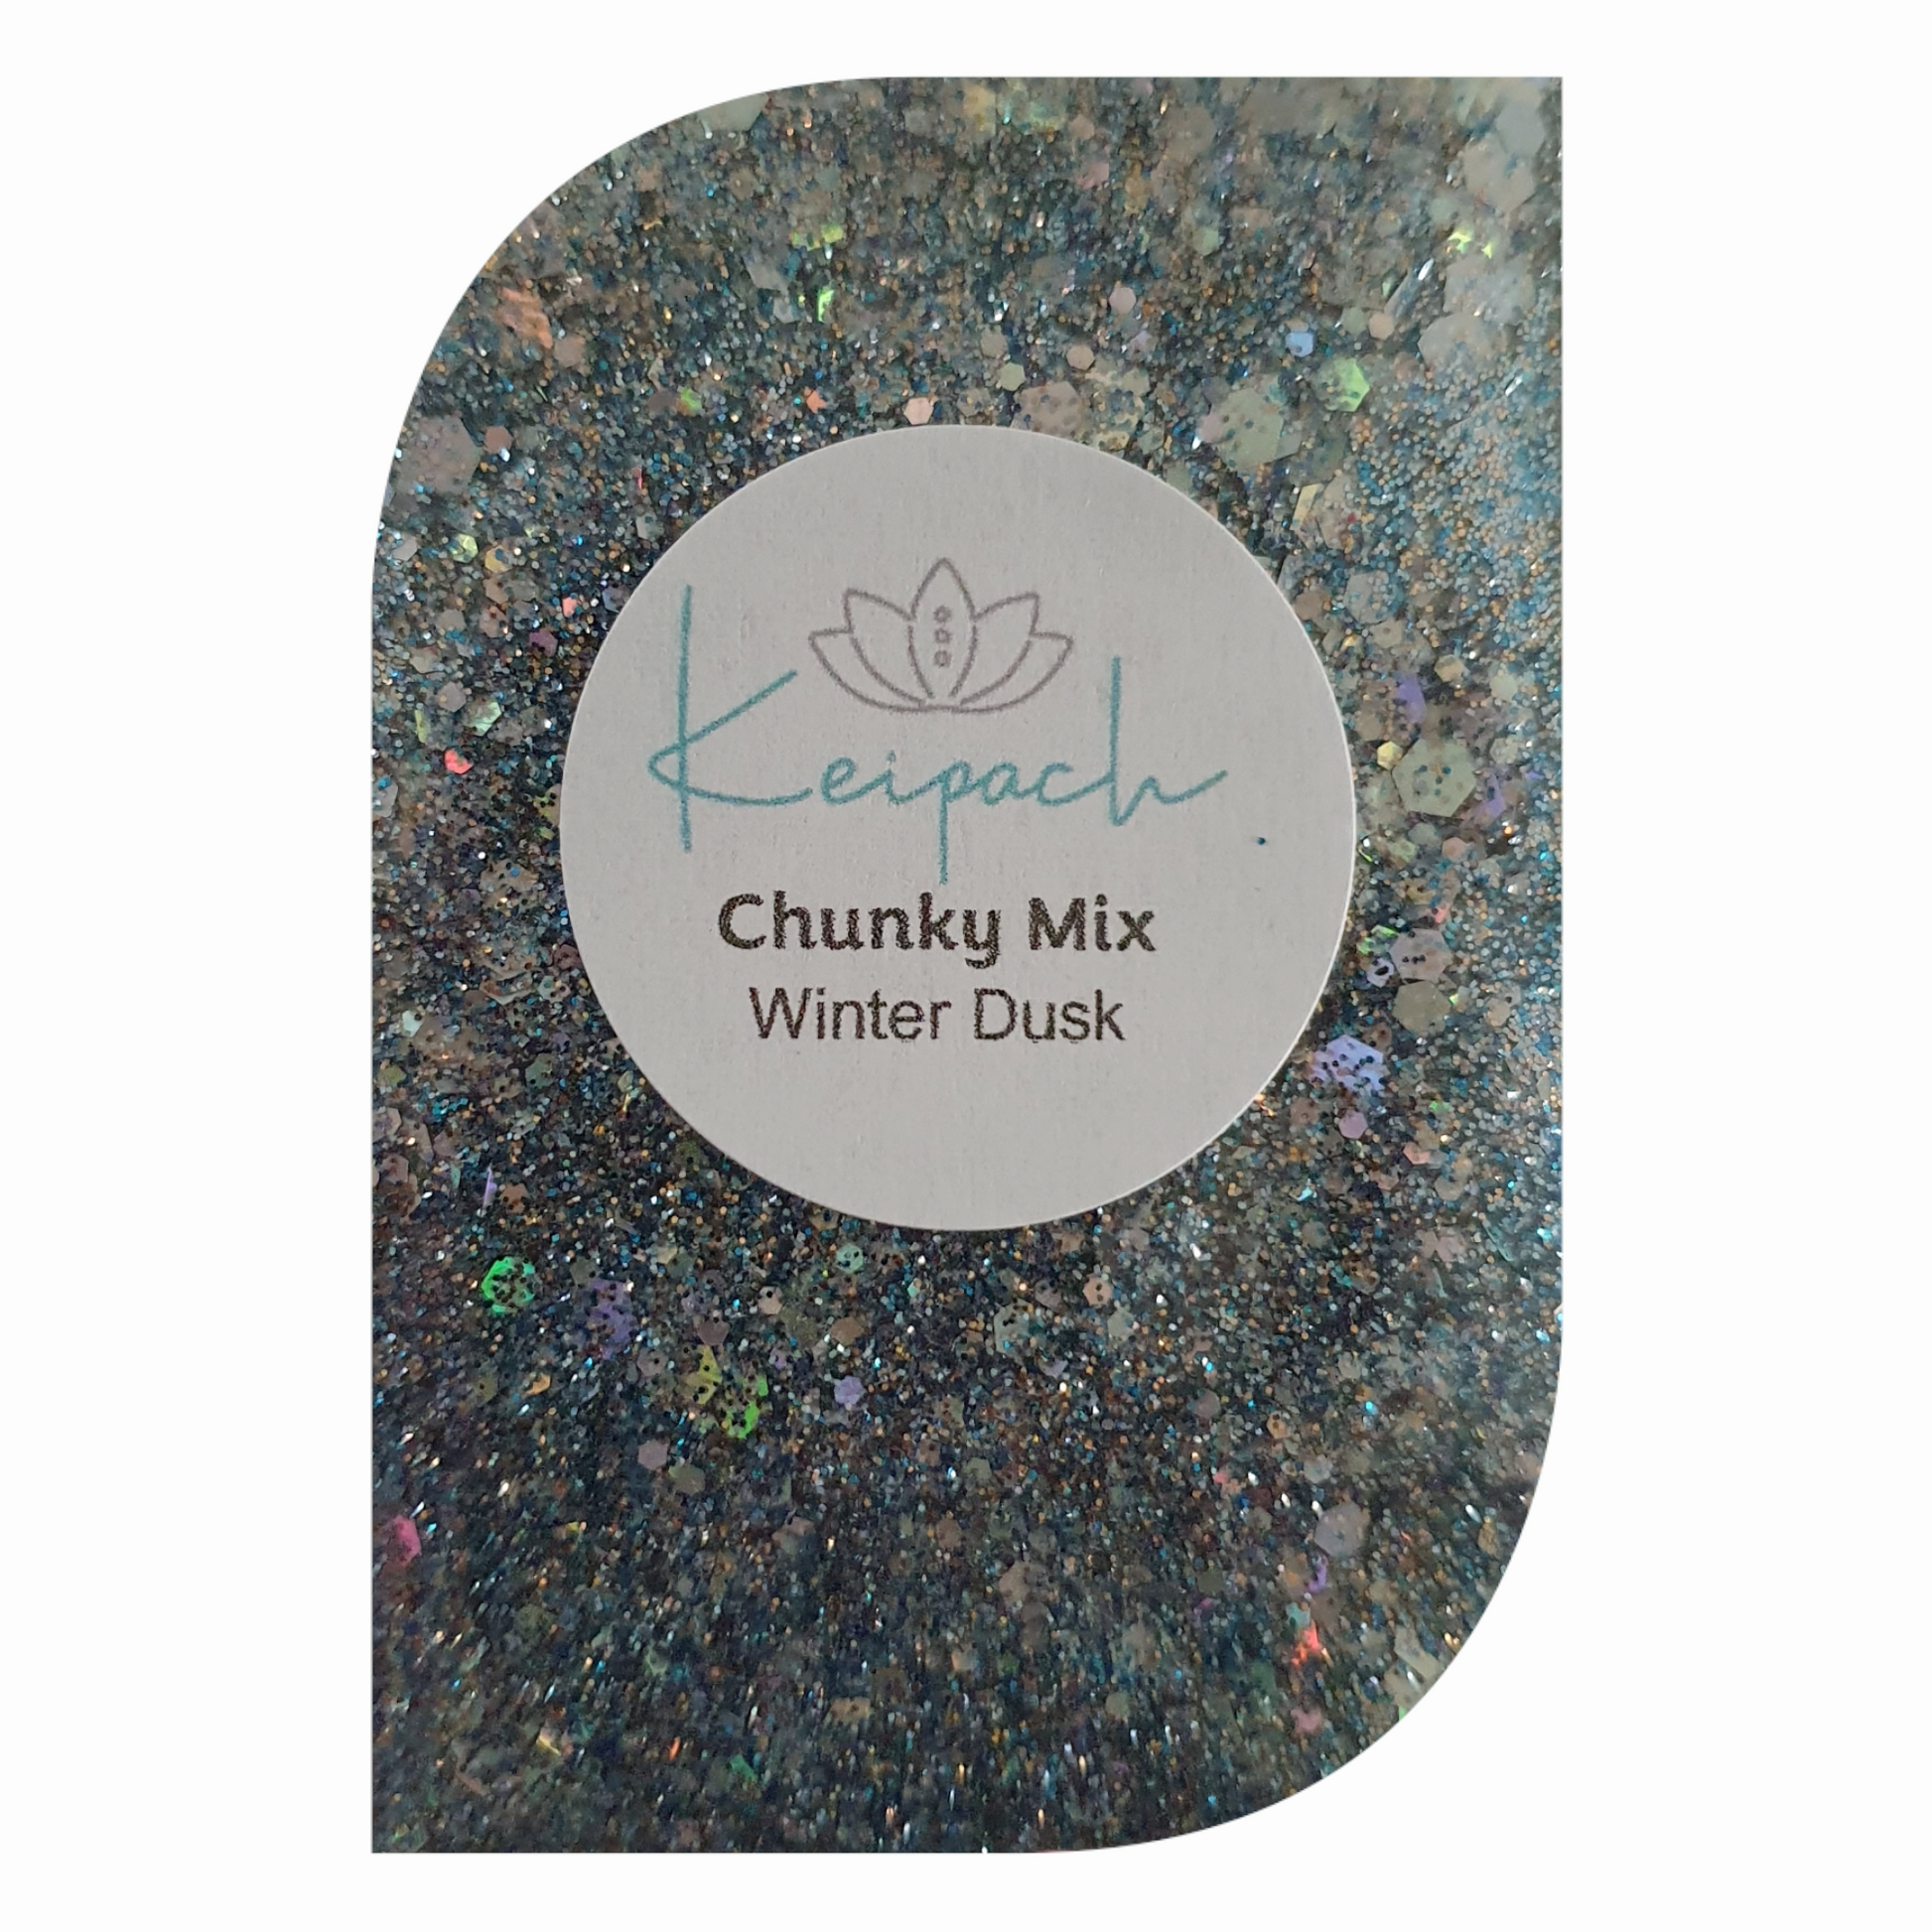 Chunky Holographic Glitter Mix - Winter Dusk - Keipach